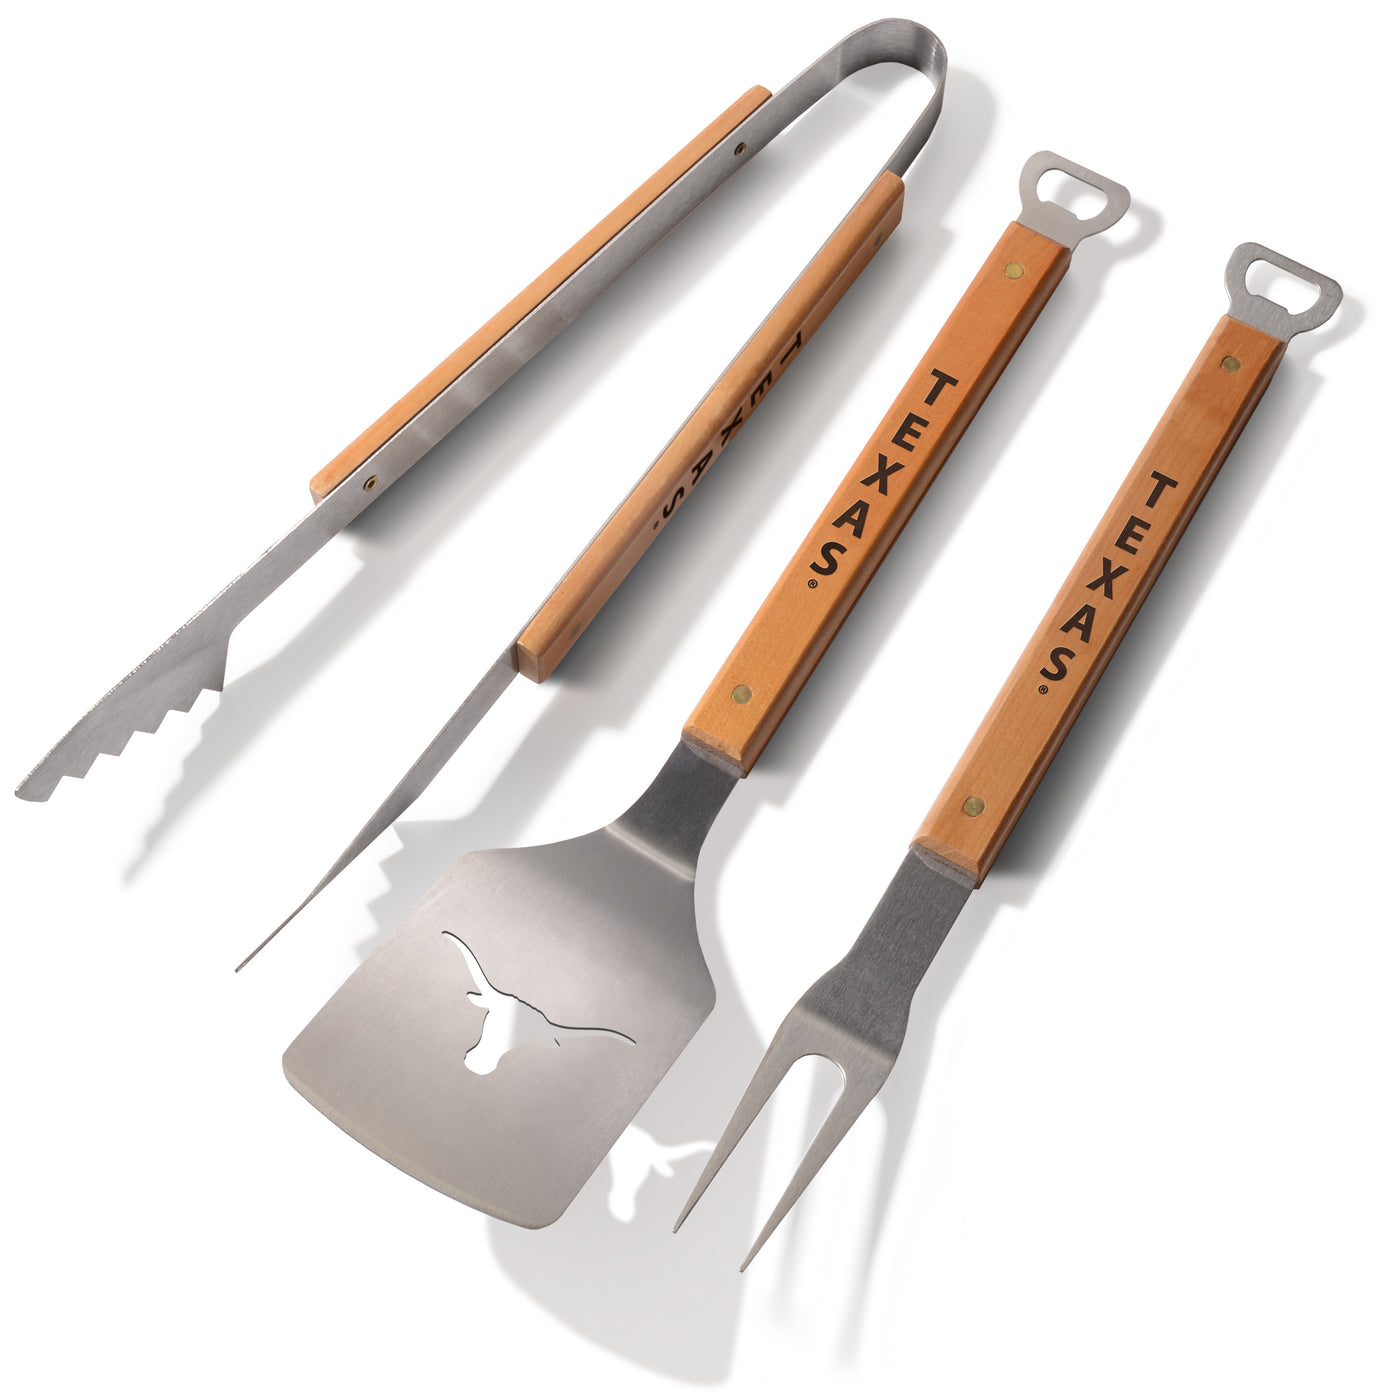 "Texas Longhorns" Stainless Steel 3-Piece BBQ Tool Sets—Special Price All Summer Long, Shipping Included! - Texas Time Gifts and Fine Art